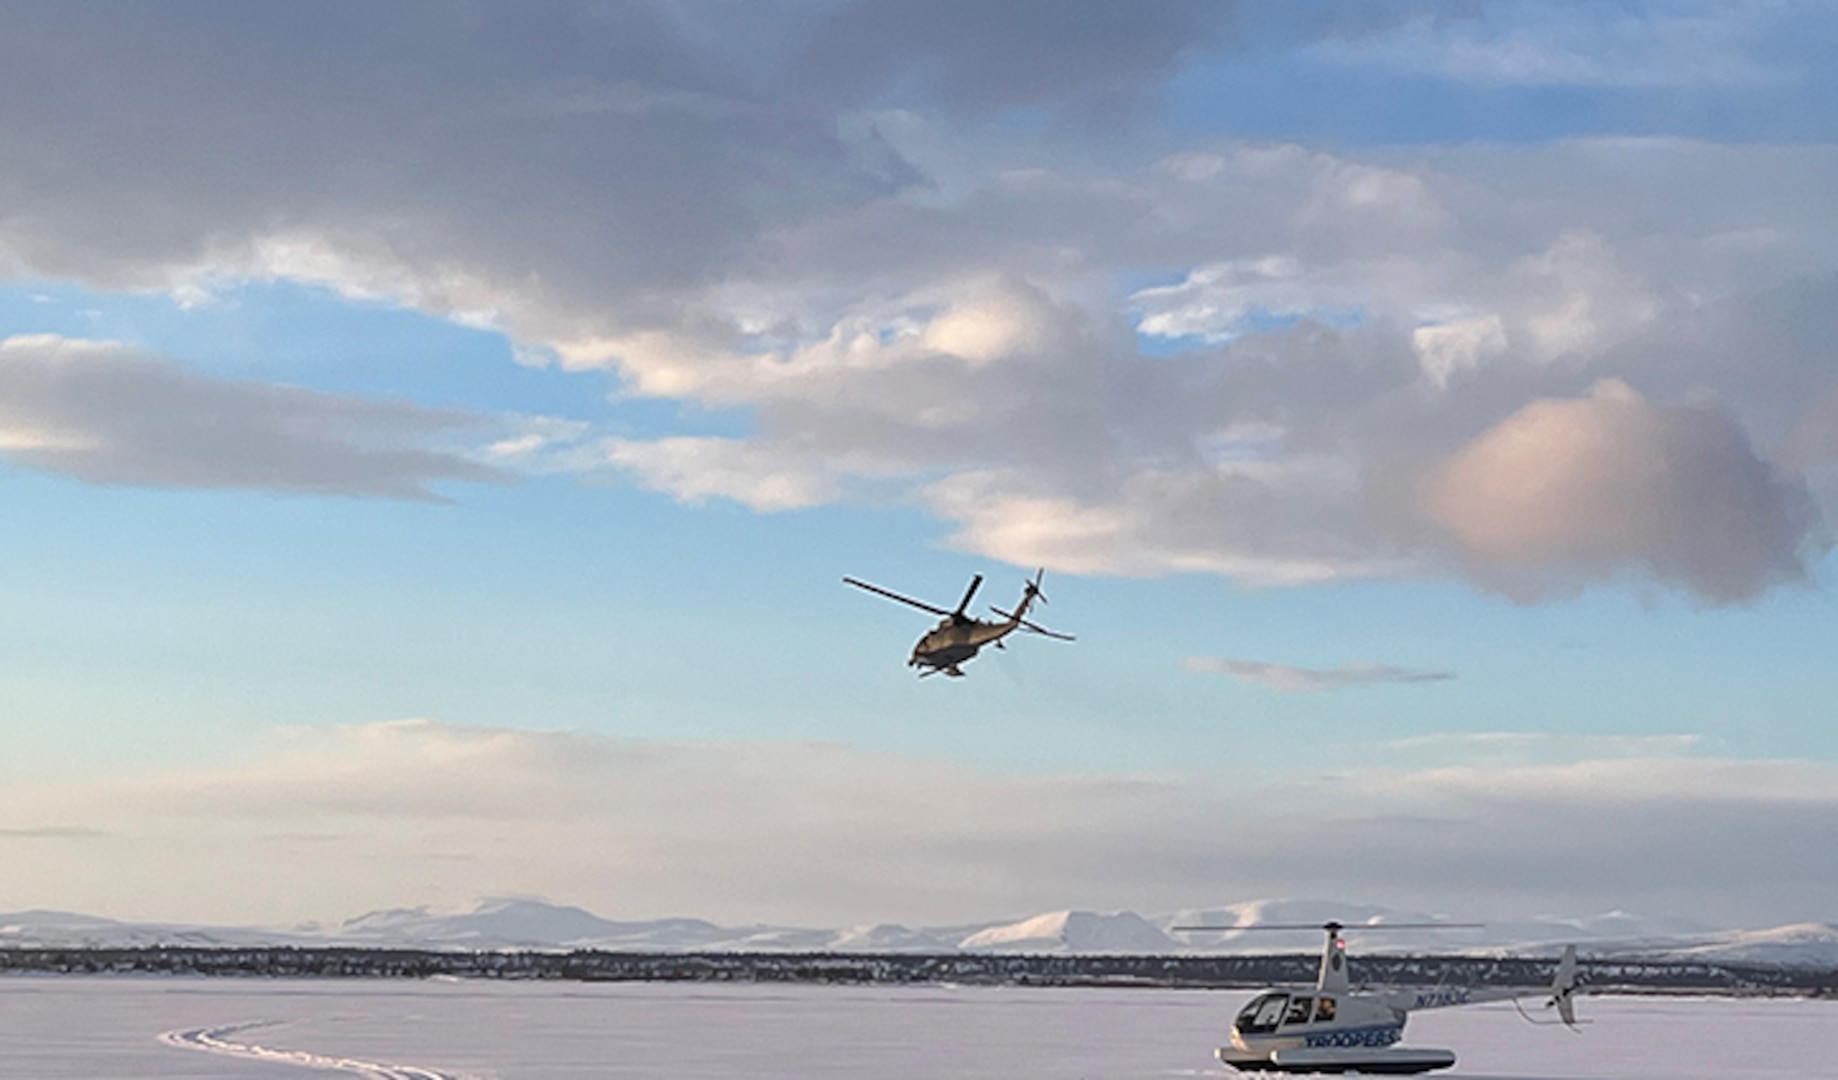 An airborne 210th Rescue Squadron HH-60G Pave Hawk conducts rescue operations March 5, 2022, at the Lake Iliamna crash site of a Cessna 206. The scope of the rescue effort was illustrated by an Alaska State Trooper R-44 helicopter.